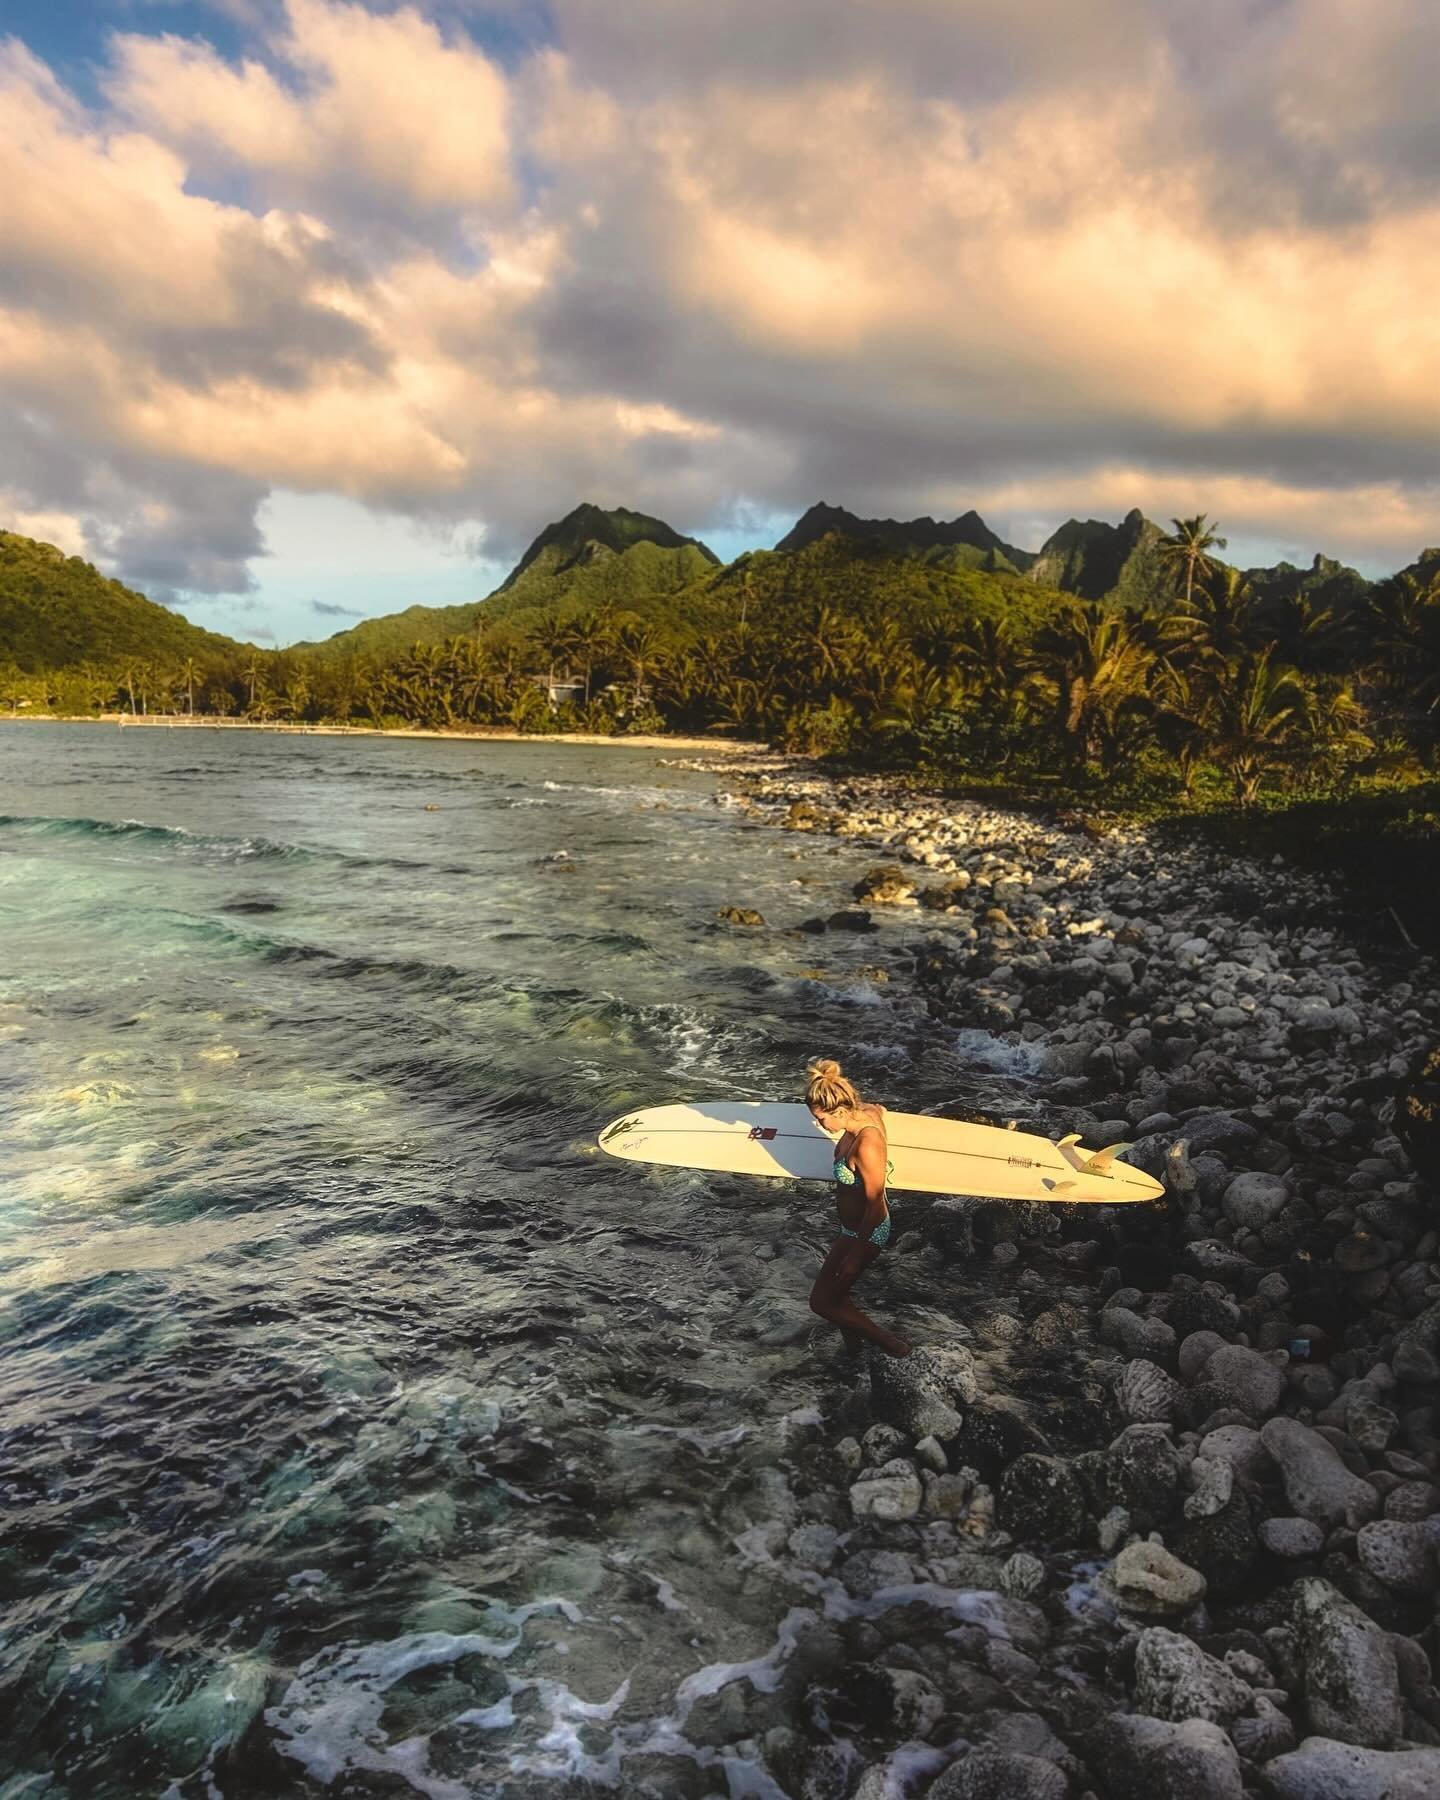 Mary Osborne heads out for an evening surf session on the island of Rarotonga in the Cook Islands. We arrived in the Cook Islands after a 7-day sail from Tahiti and couldn&rsquo;t wait to get in the water for a much-needed surf. Our seven-day journey